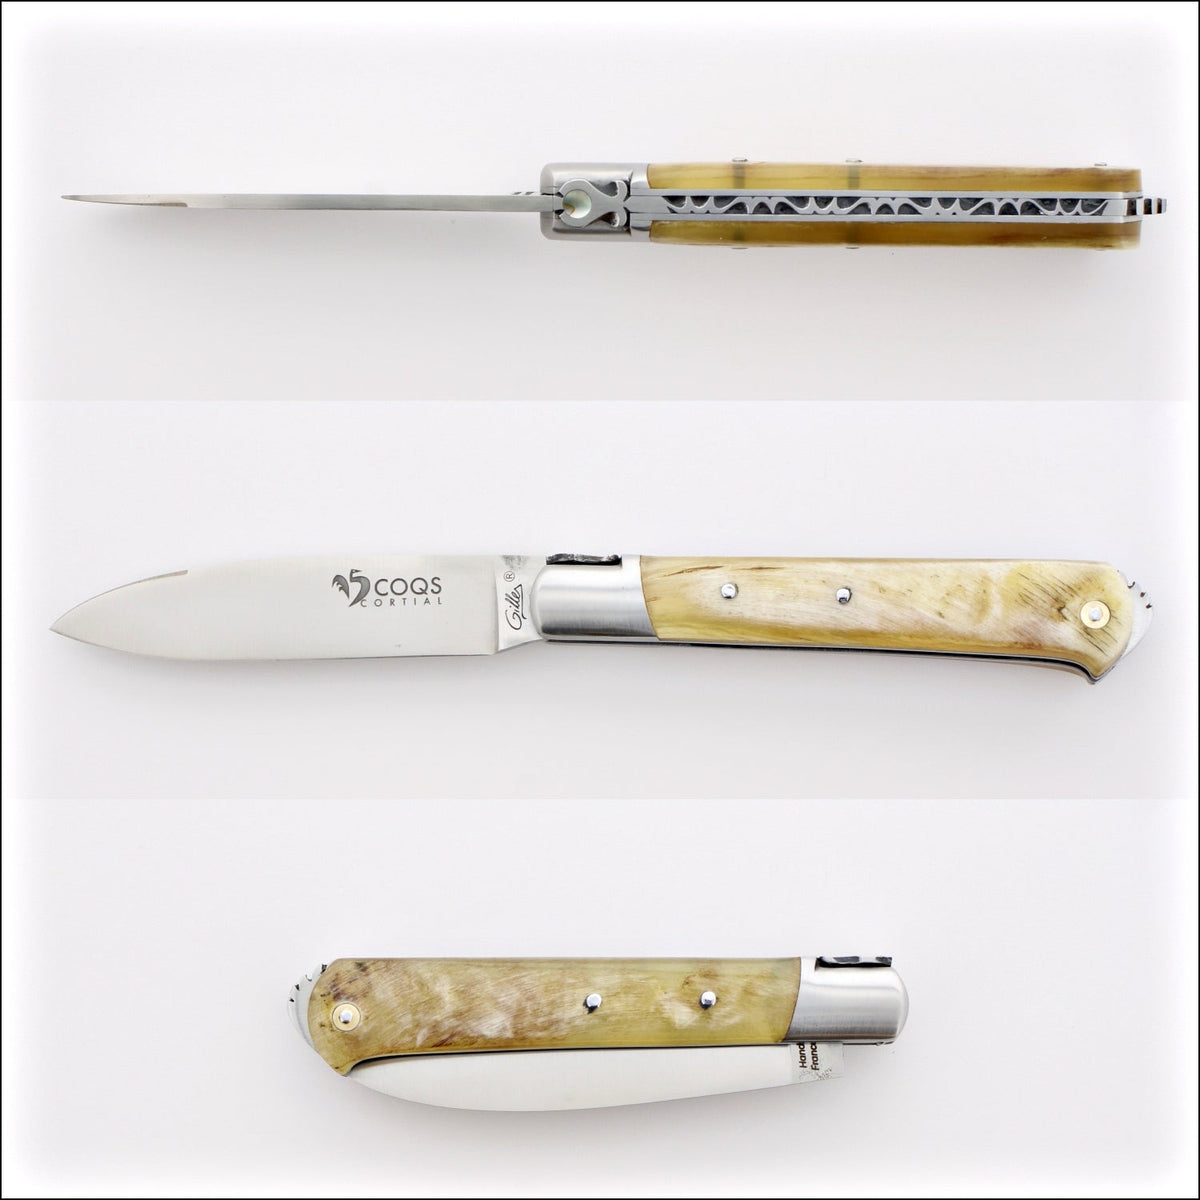 5 Coqs Pocket Knife - Ram Horn &amp; Mother of Pearl Inlay